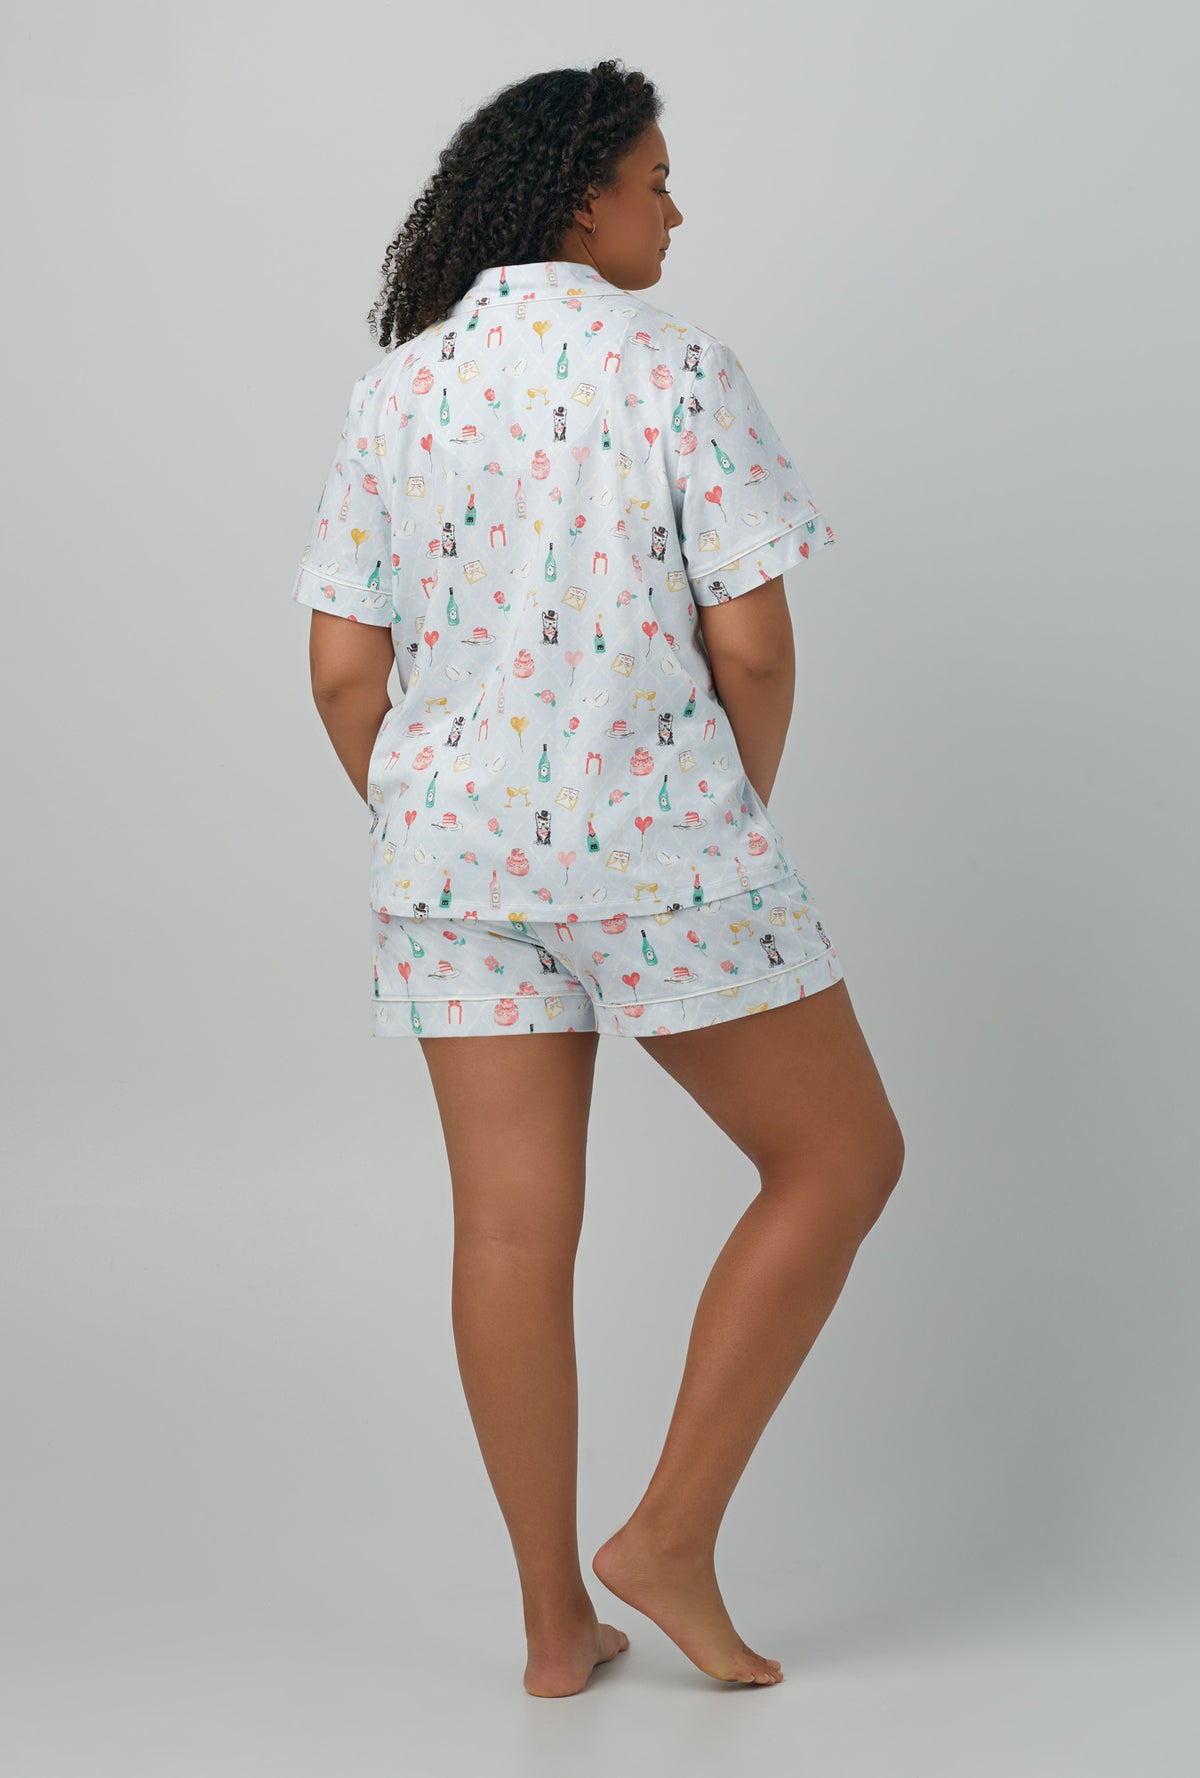 A lady wearing Short Sleeve Classic Shorty Stretch Jersey PJ Set with wedding party print